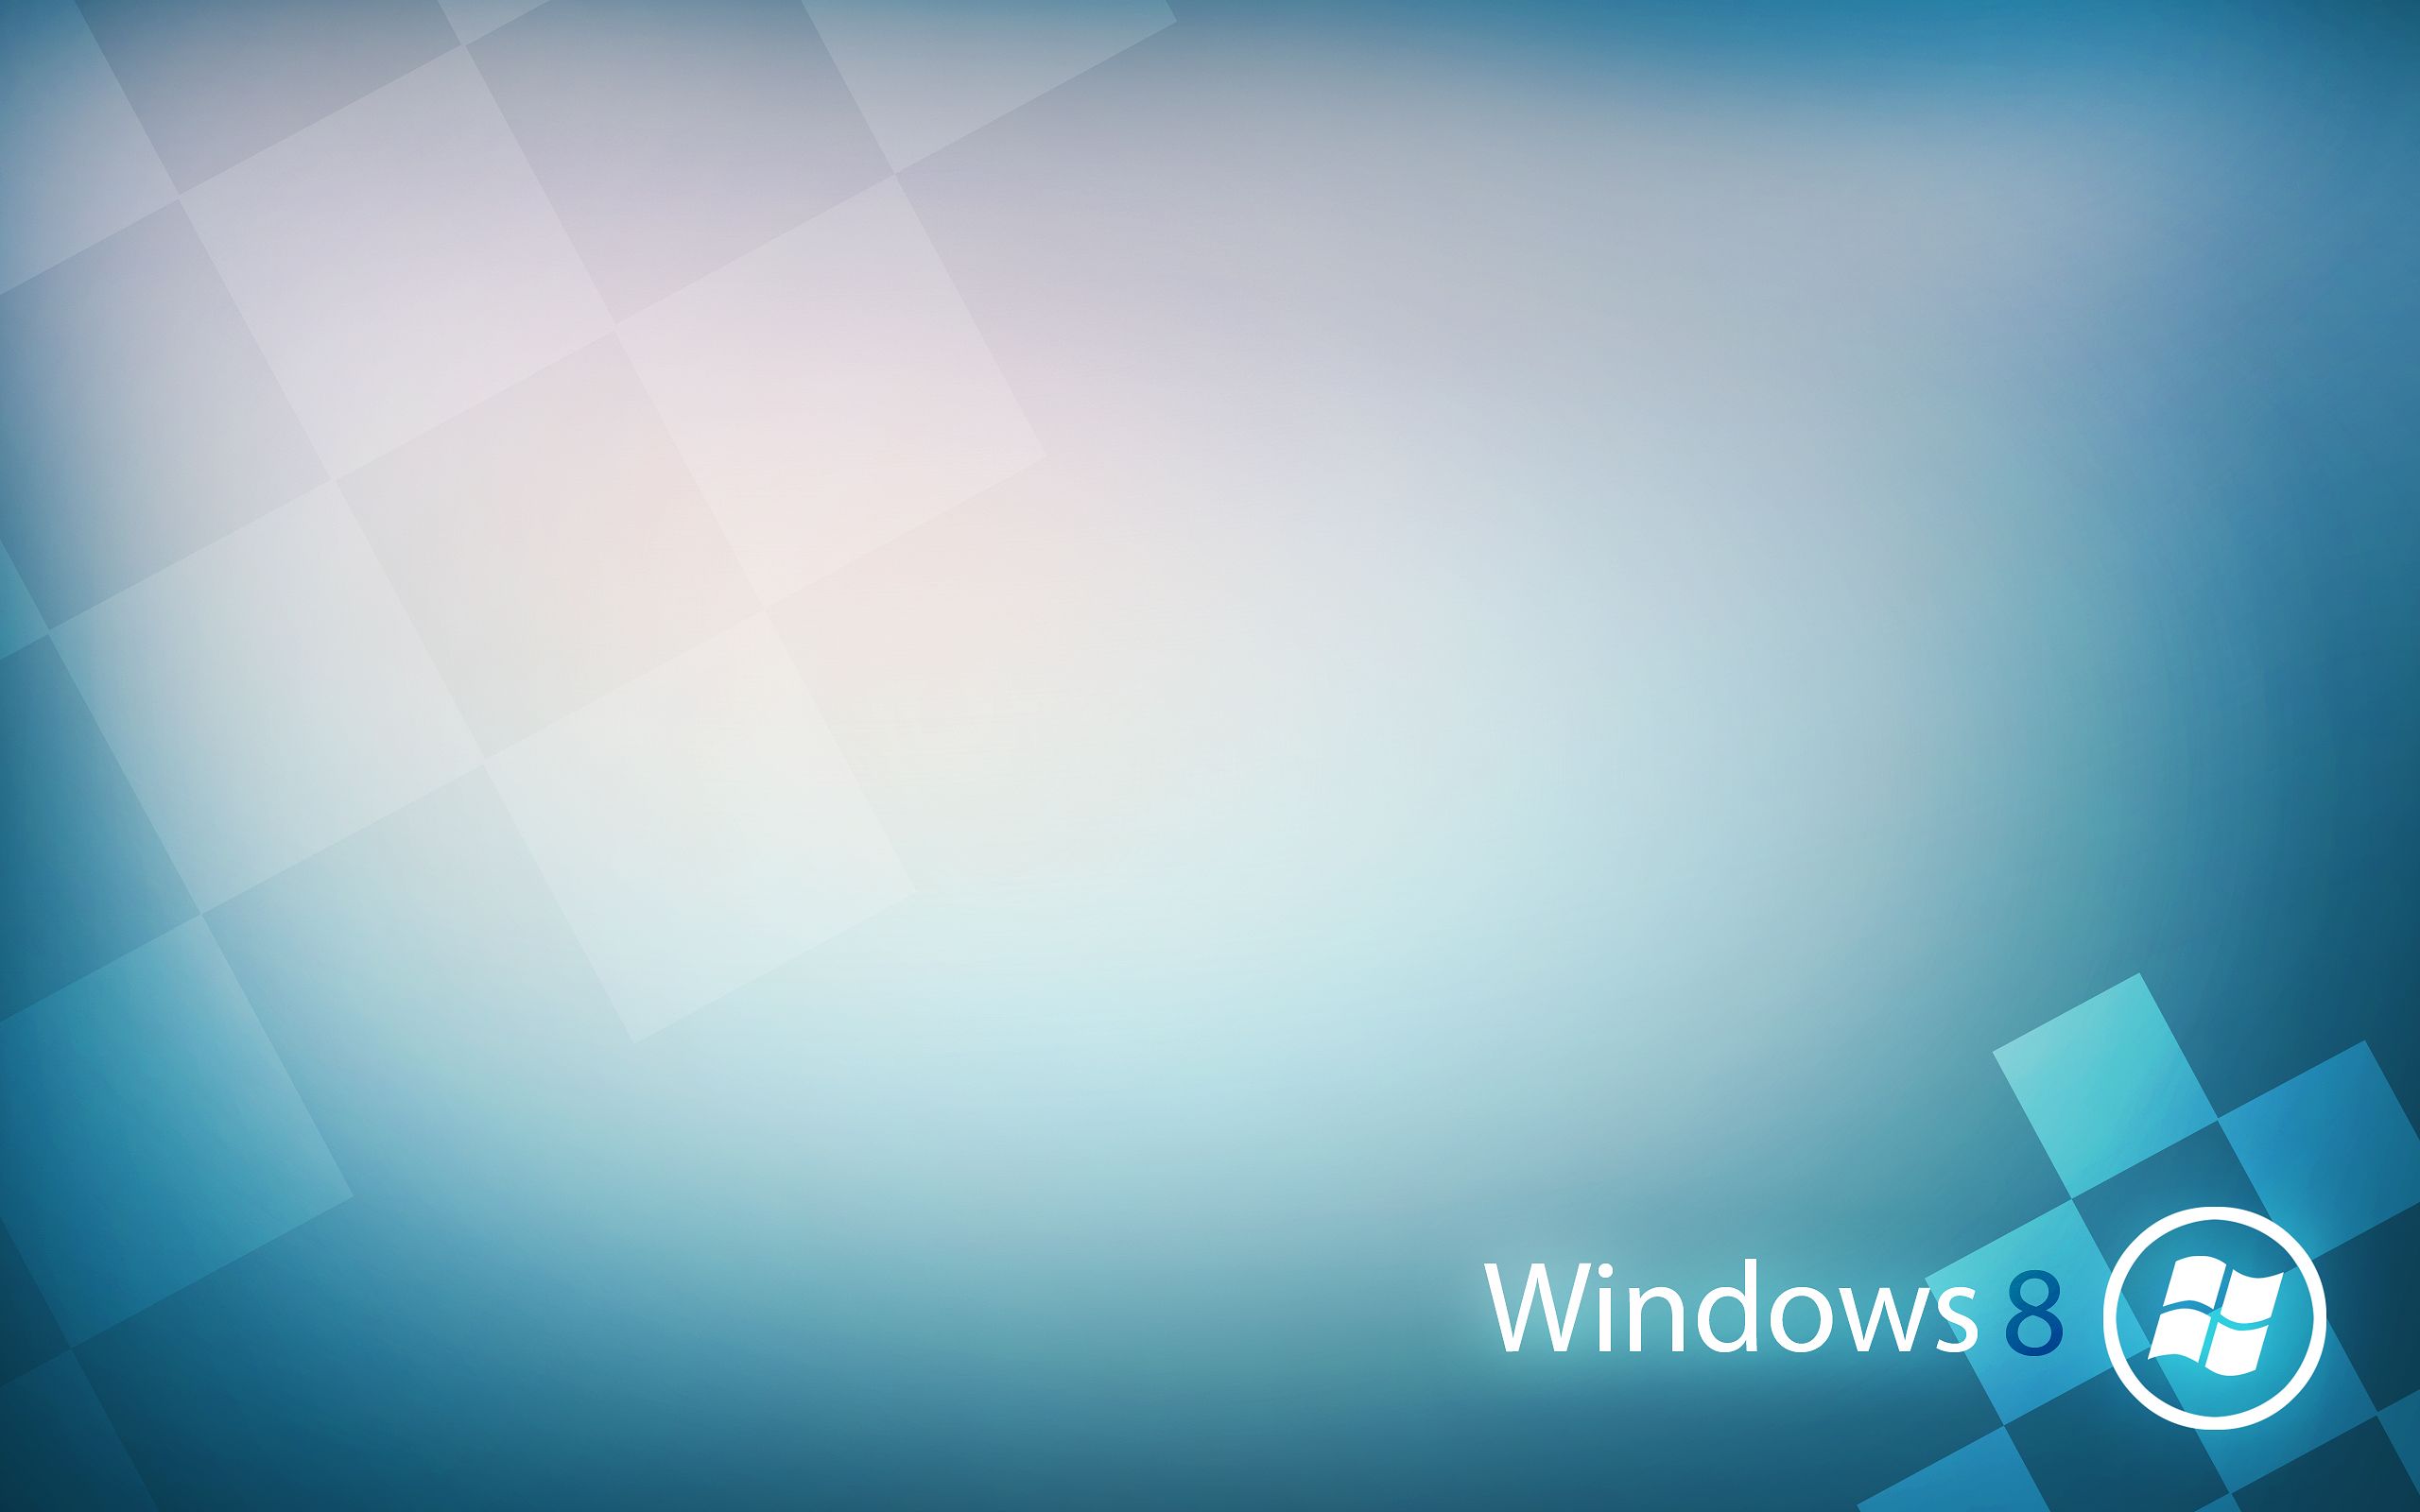 Windows Wallpapers - Page 1 - HD Wallpapers